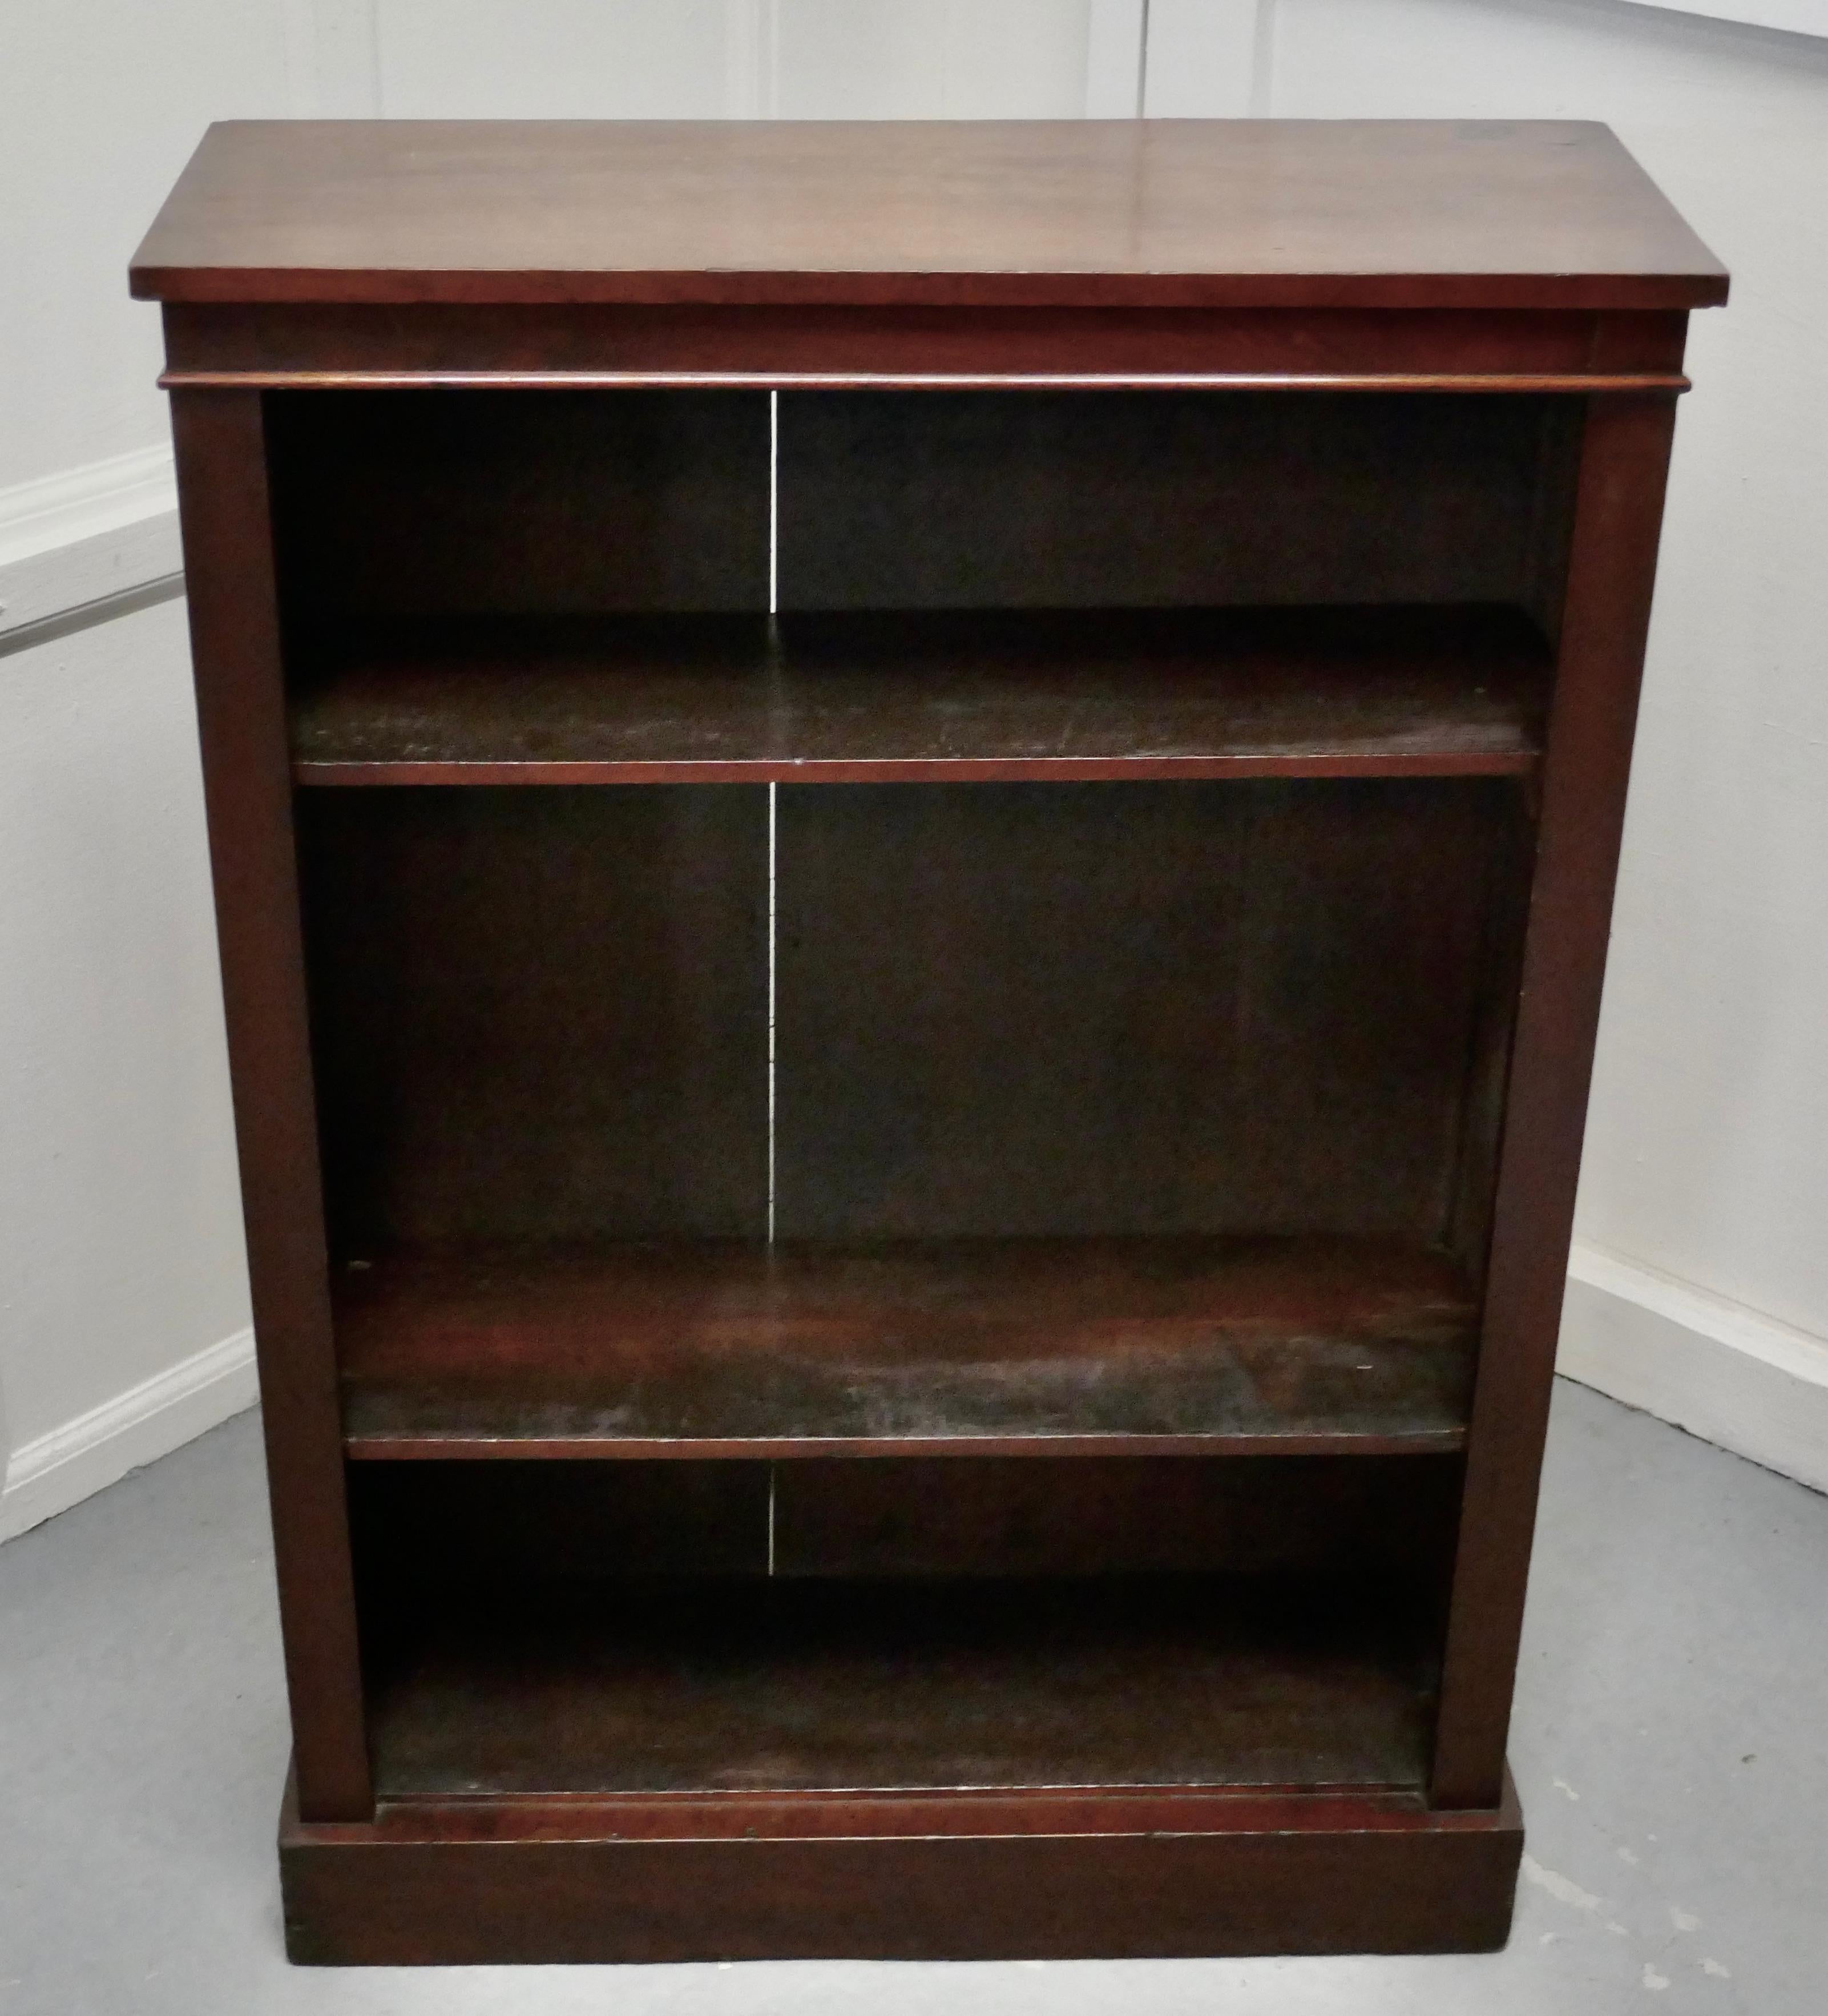 Victorian open mahogany bookcase.

This mahogany bookcase has 3 fixed shelves, the top has a moulded edge and it stands on a sturdy plinth 
The bookcase is in good attractive condition 
This piece would work very well in your living room, office